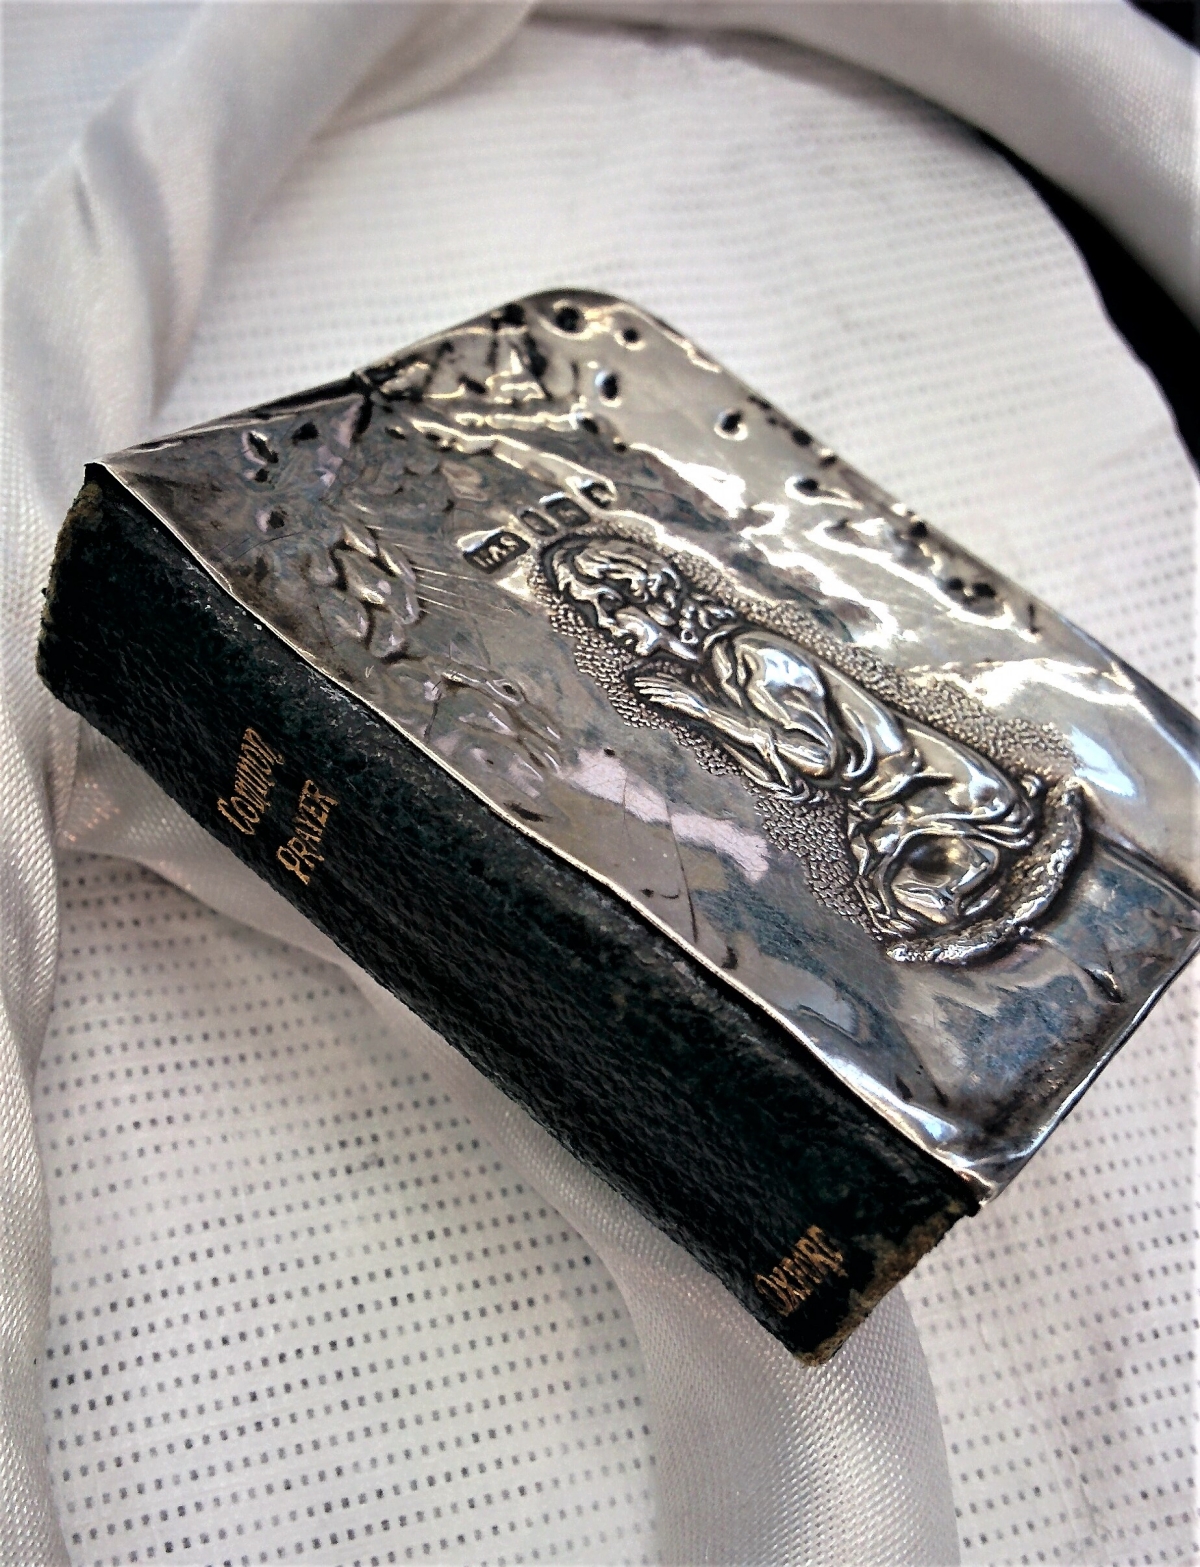 Silver Book of Common Prayer at the Kinder Library.